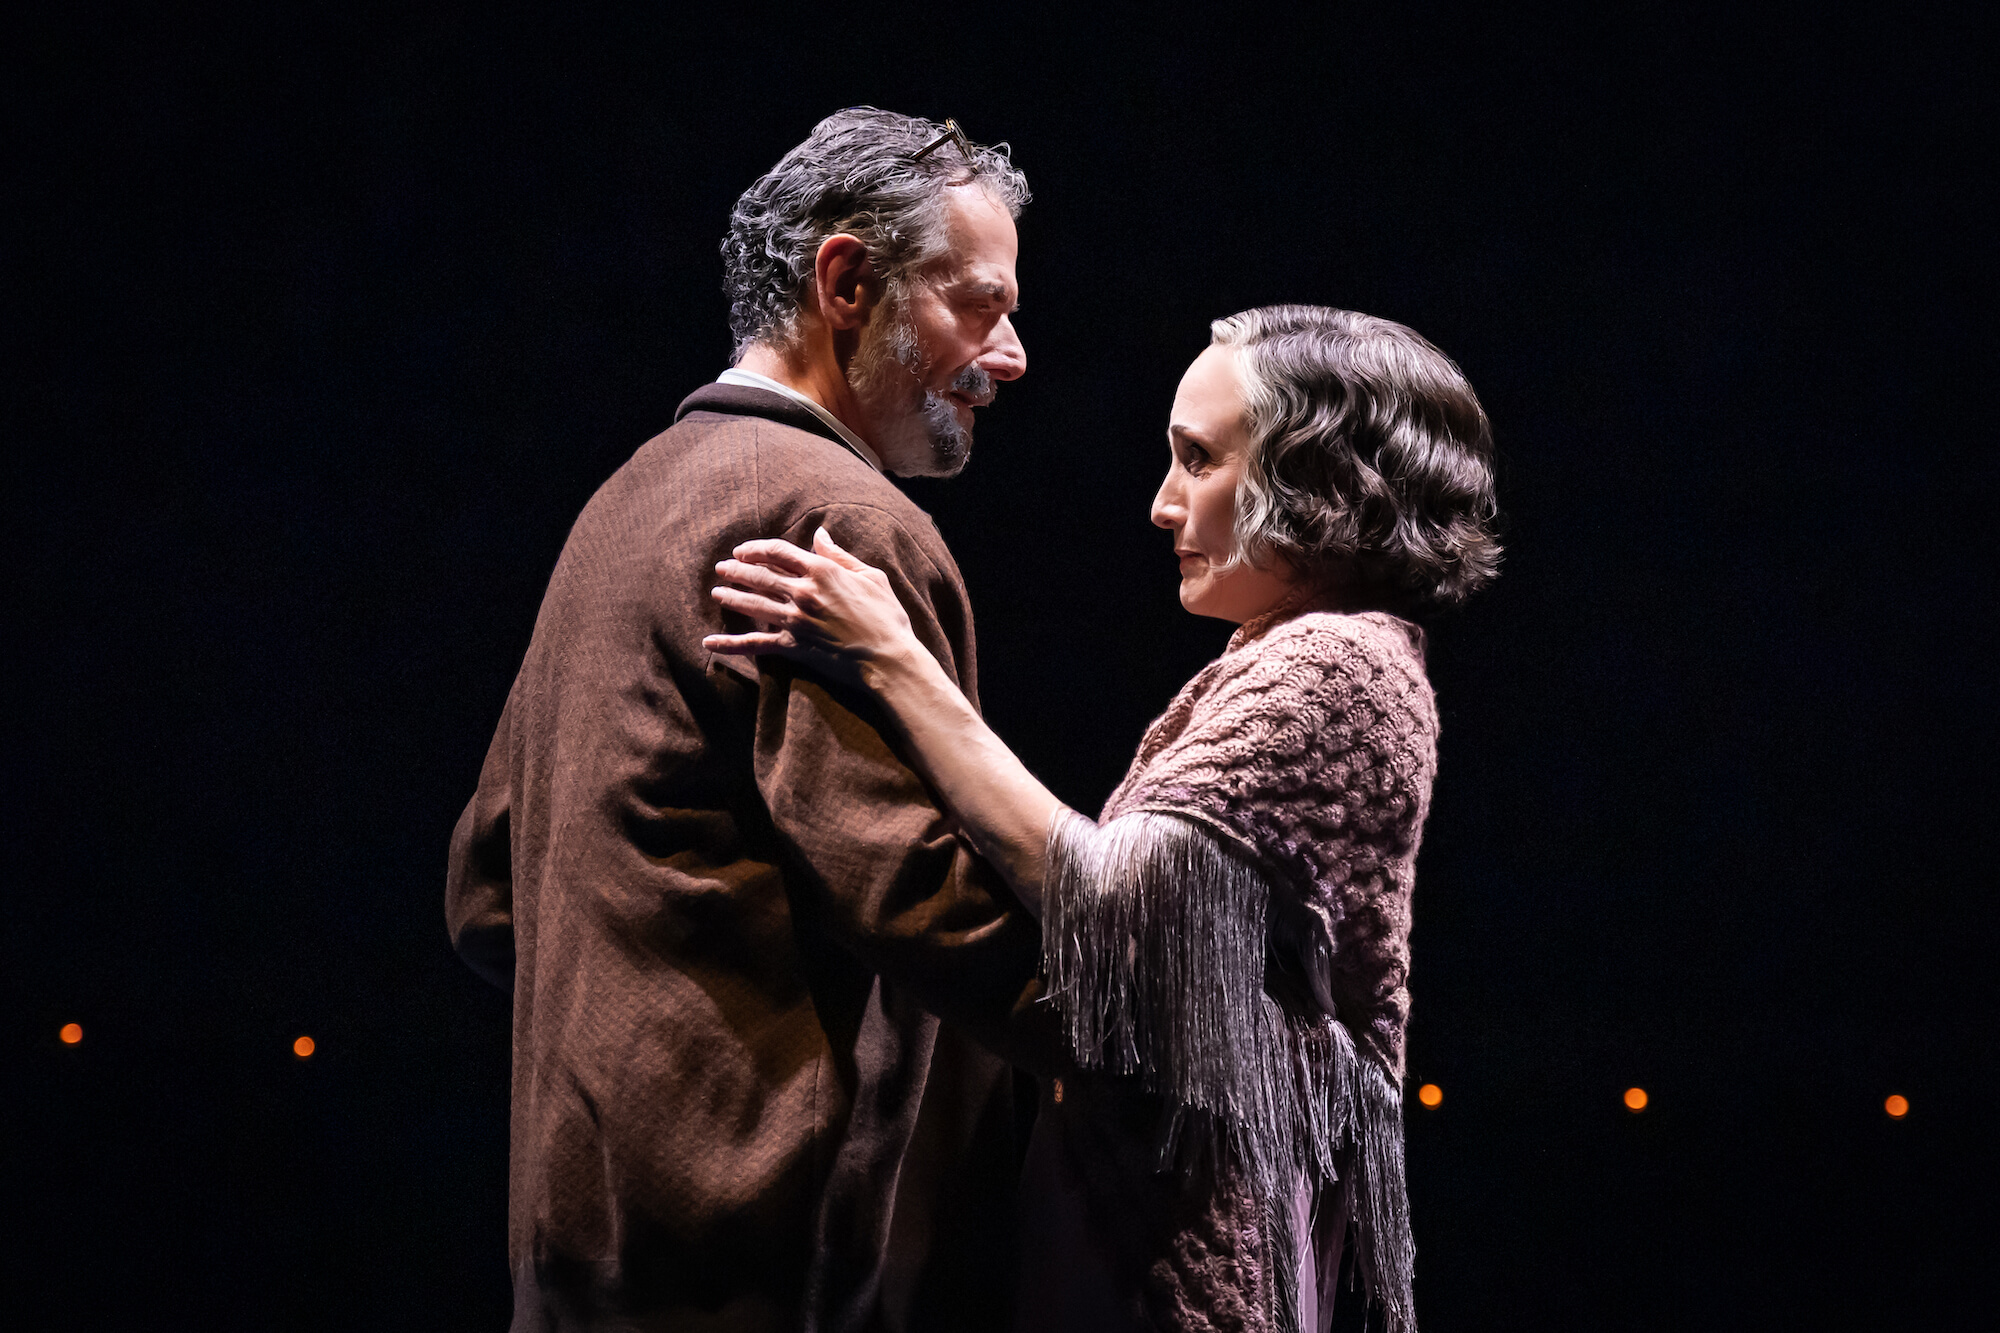 Steven Skybell as Herr Schultz and Bebe Neuwirth as Fraulein Schneider in Rebecca Frecknell's revival of "Cabaret" at the August Wilson Theatre.